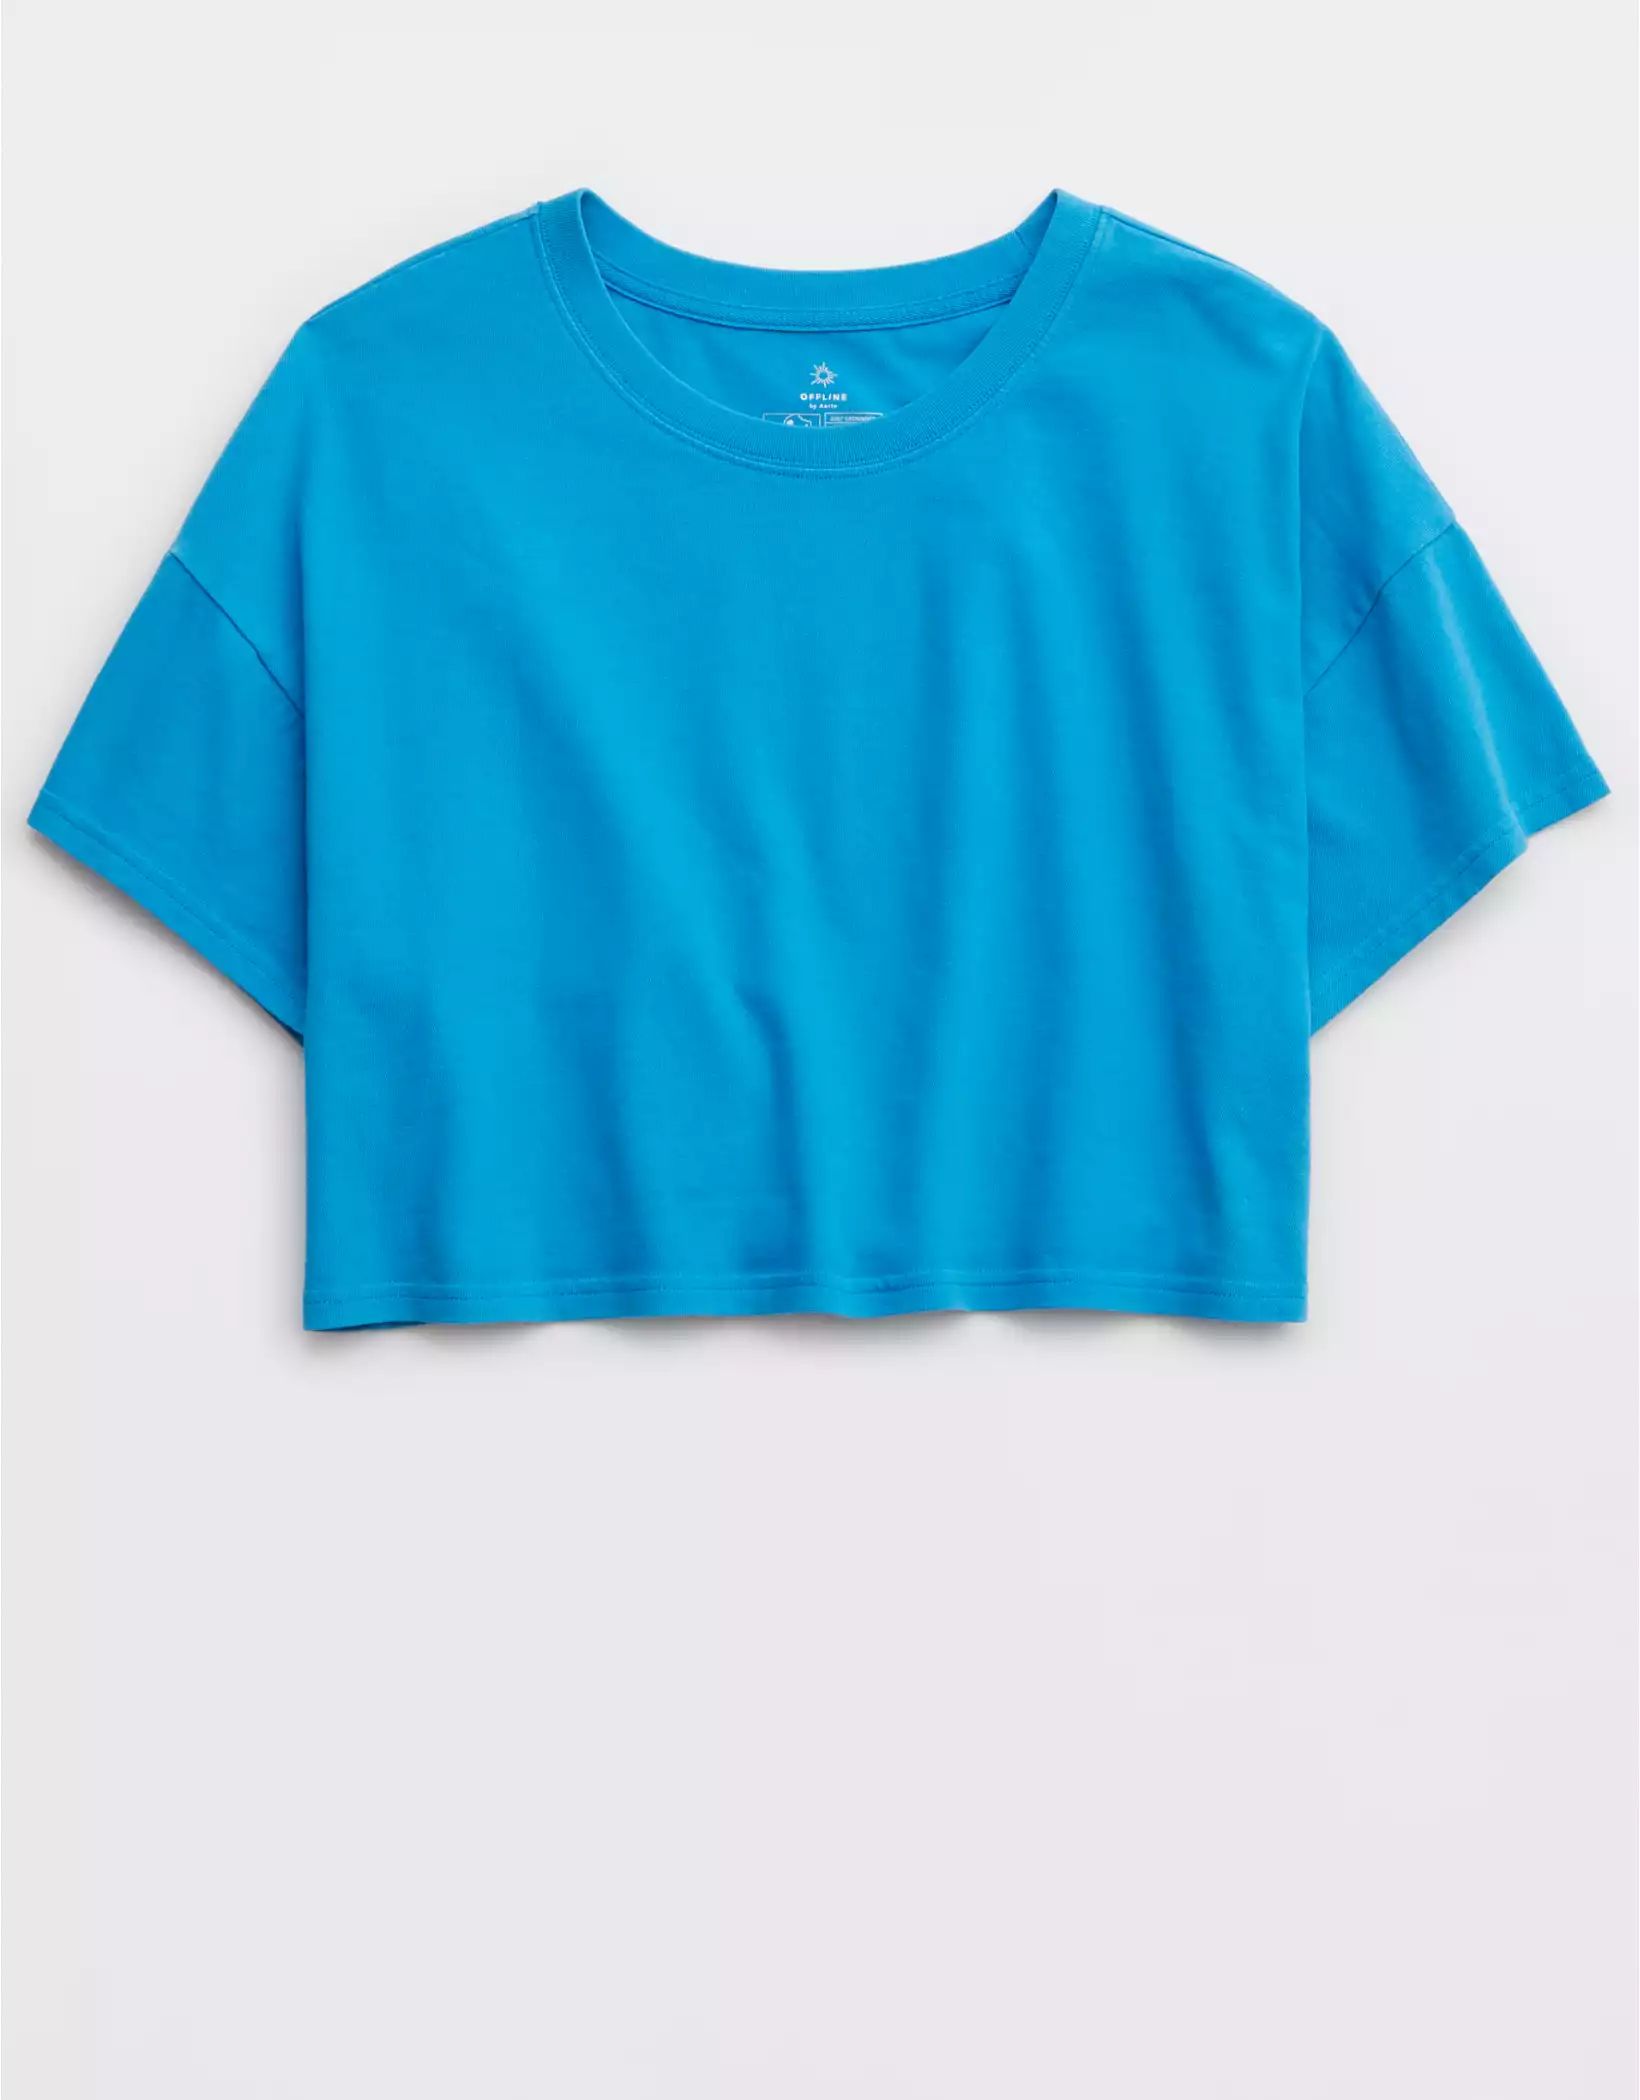 OFFLINE By Aerie Cropped T-Shirt | Aerie